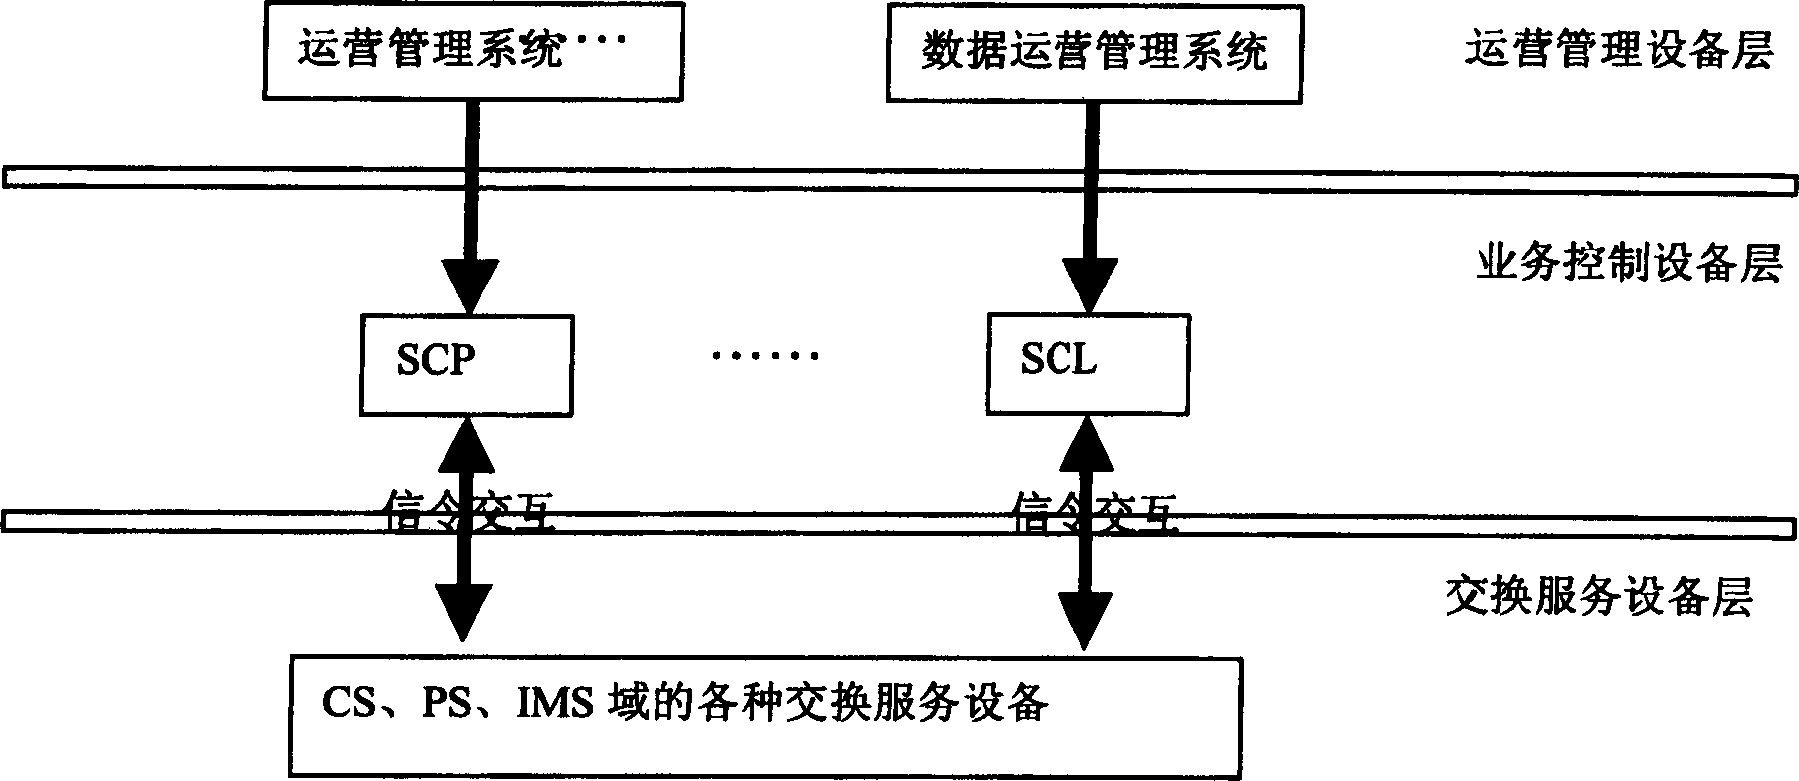 Telecommunication service charging system and method